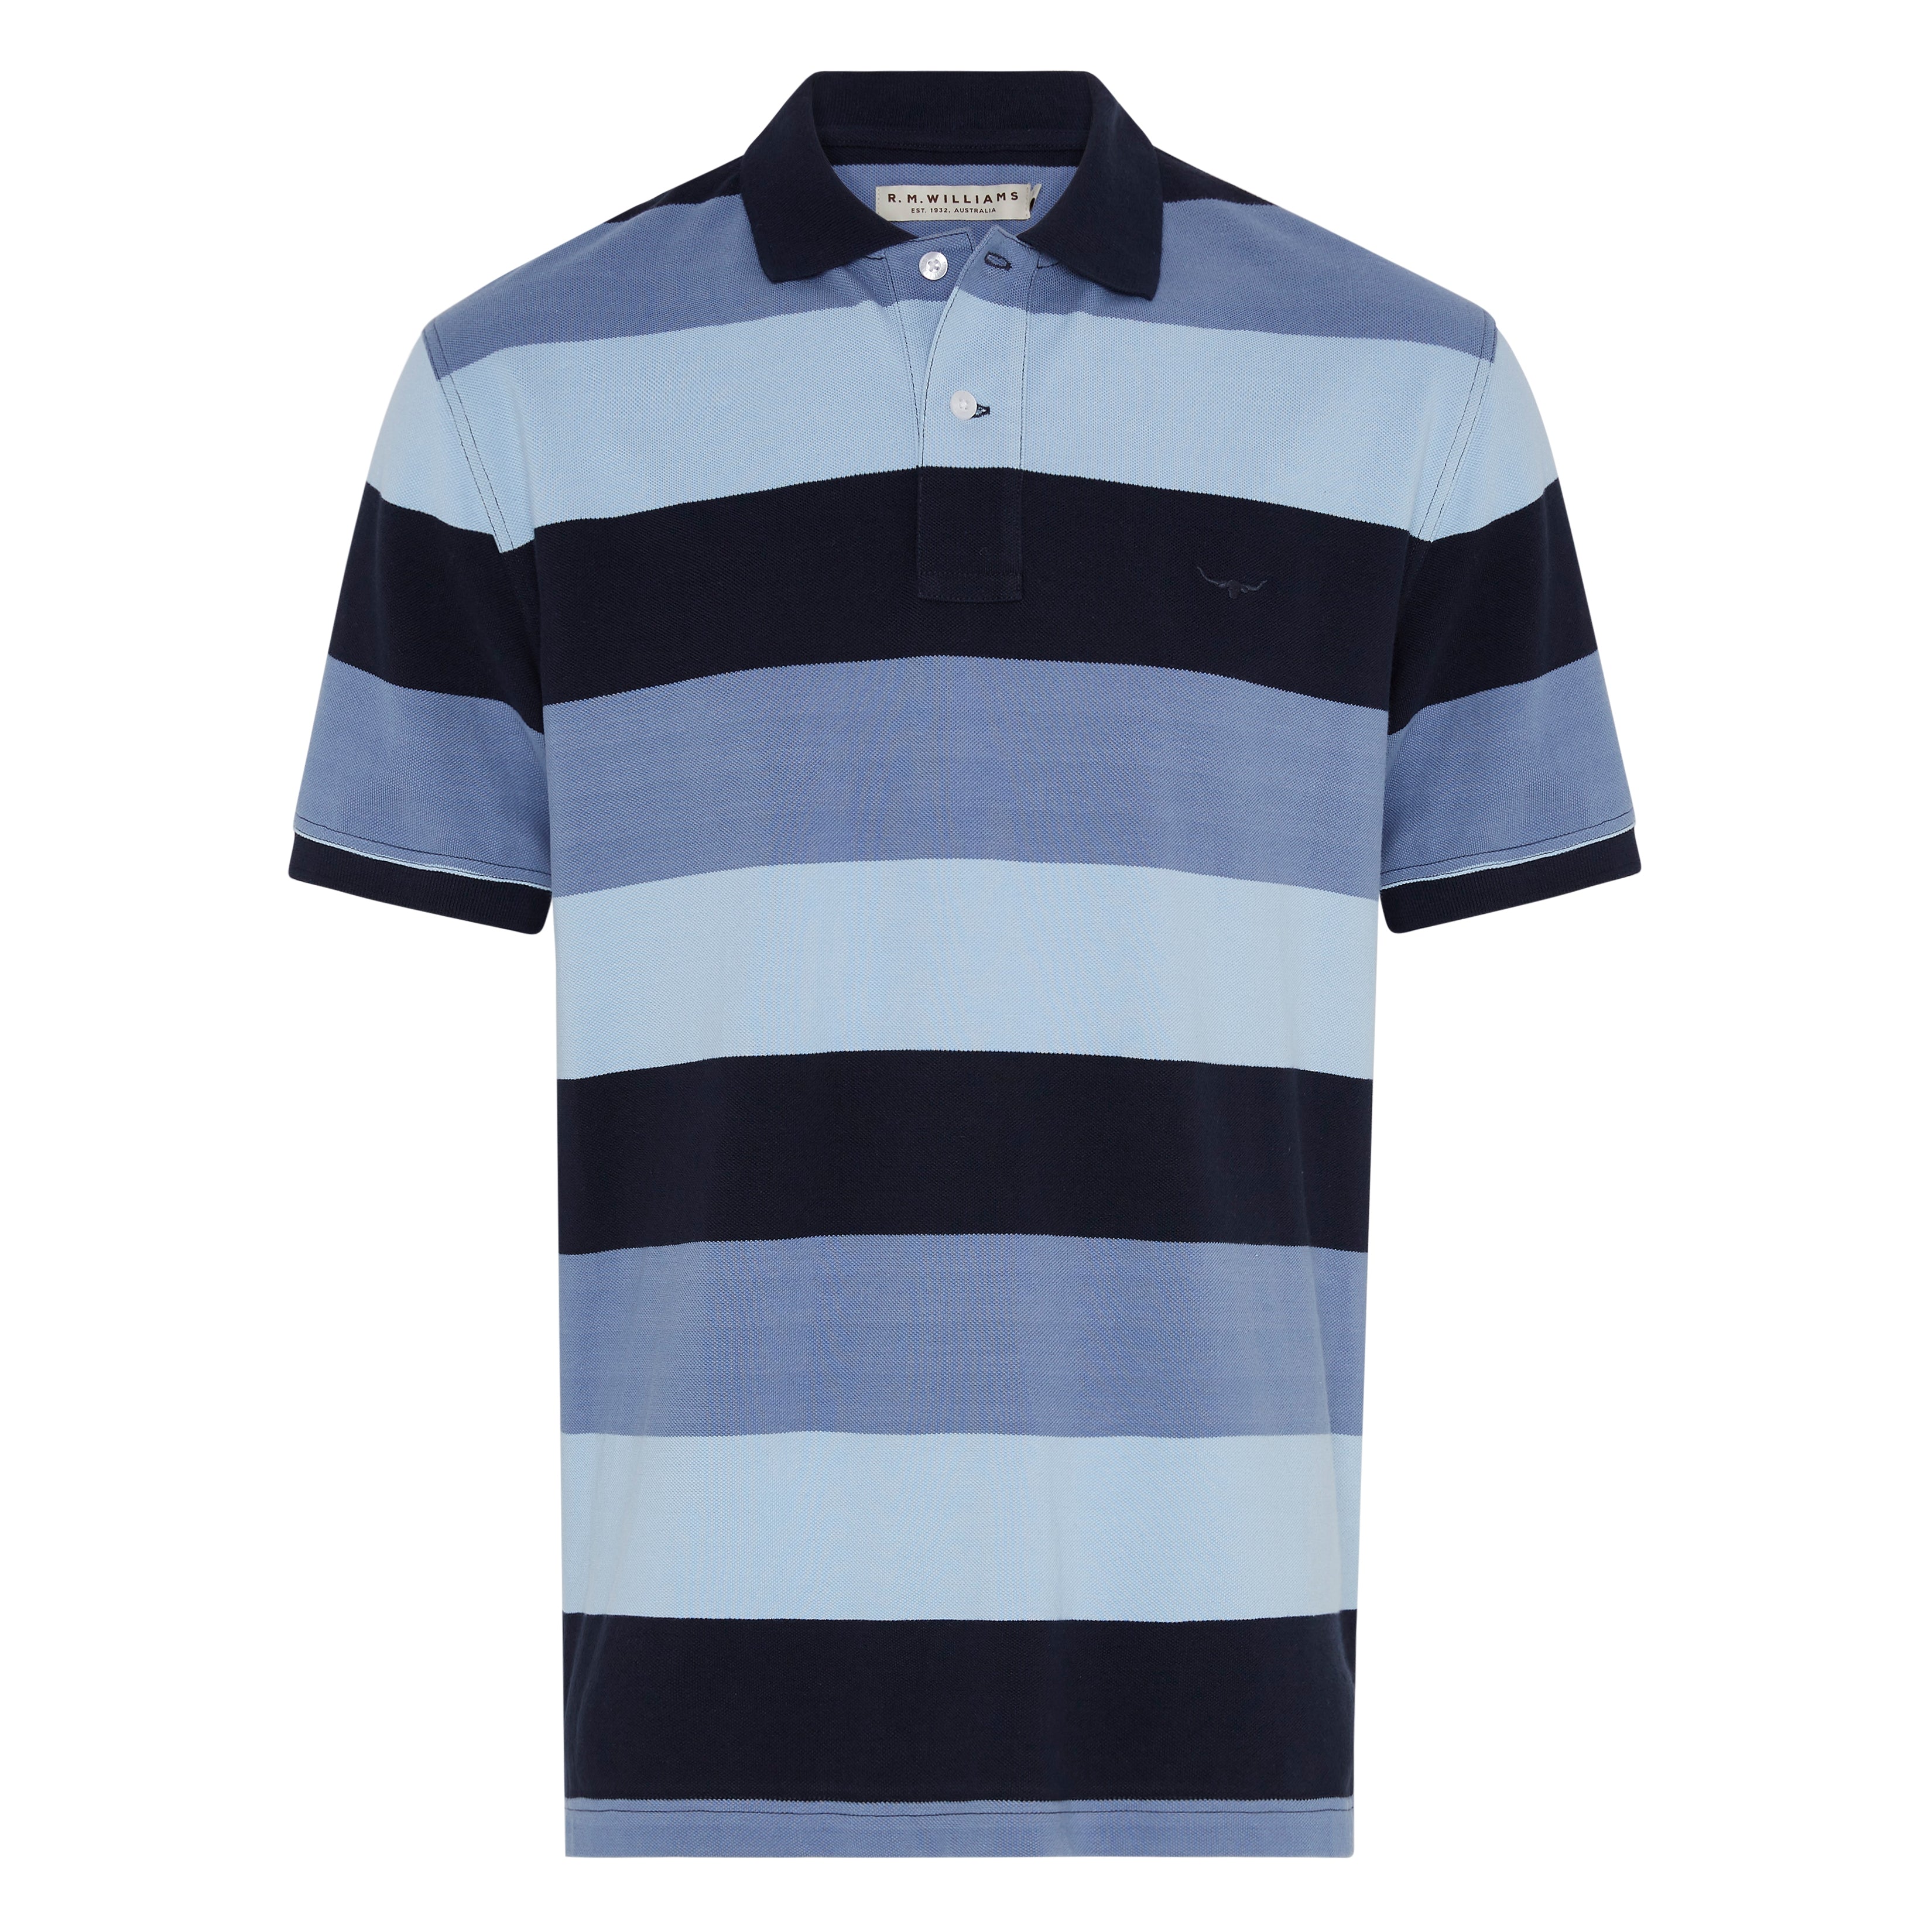 FREE EXPRESS POST RM Williams Rod Mid Stripe Polo RRP 79.99